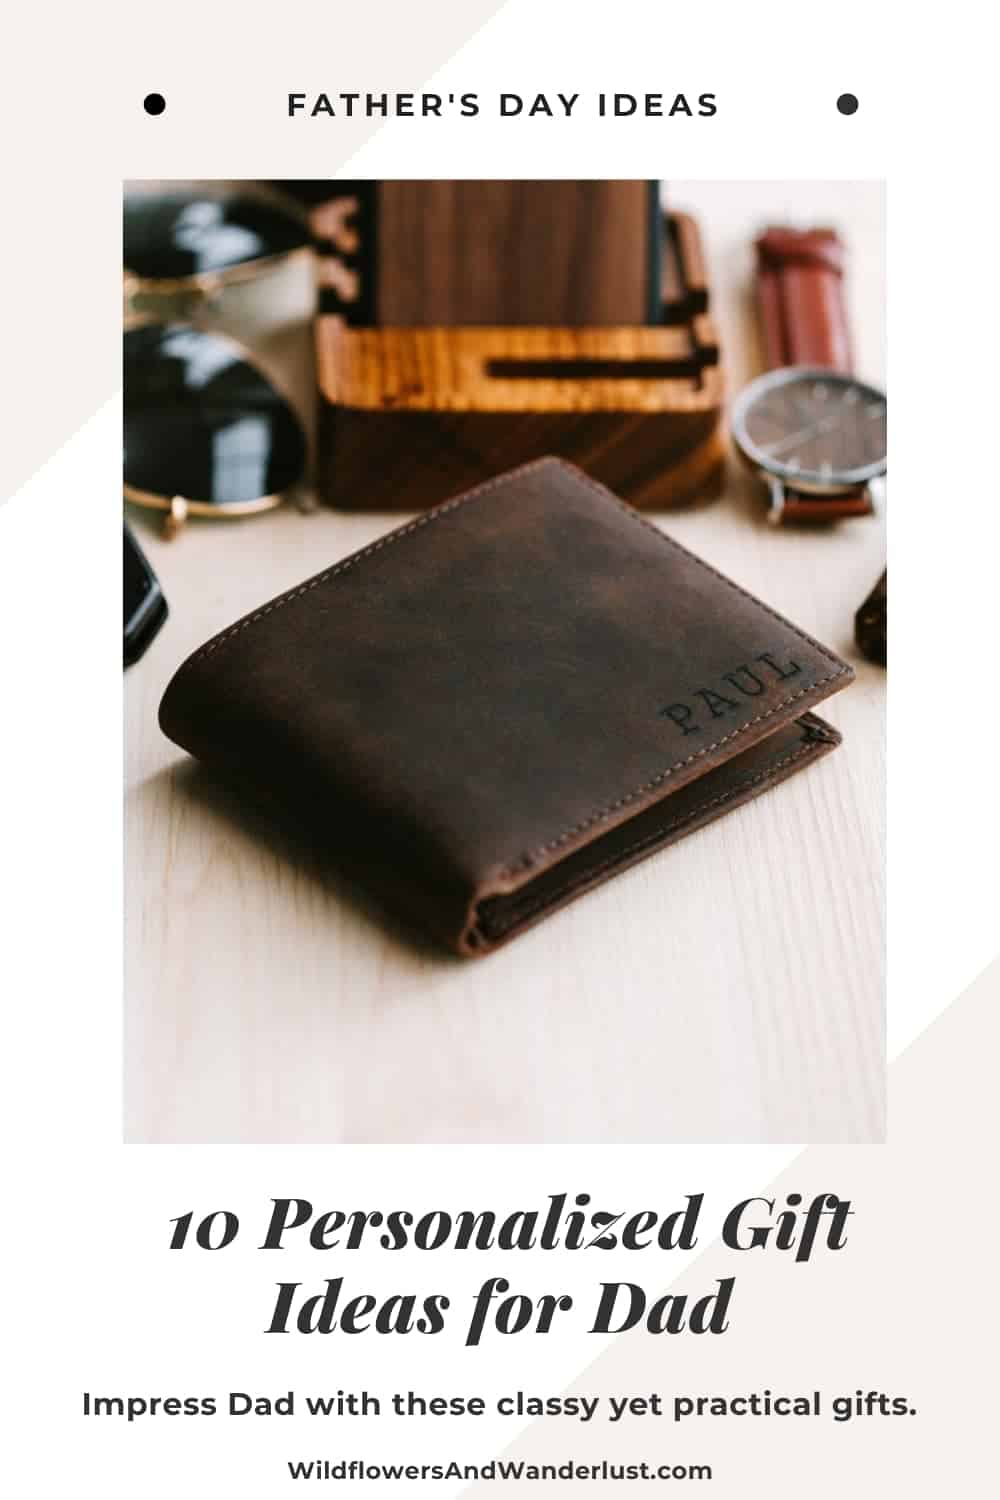 Here's a great list of personalized Father's Day gifts that are all under $50 and all super practical.  WildflowersAndWanderlust.com